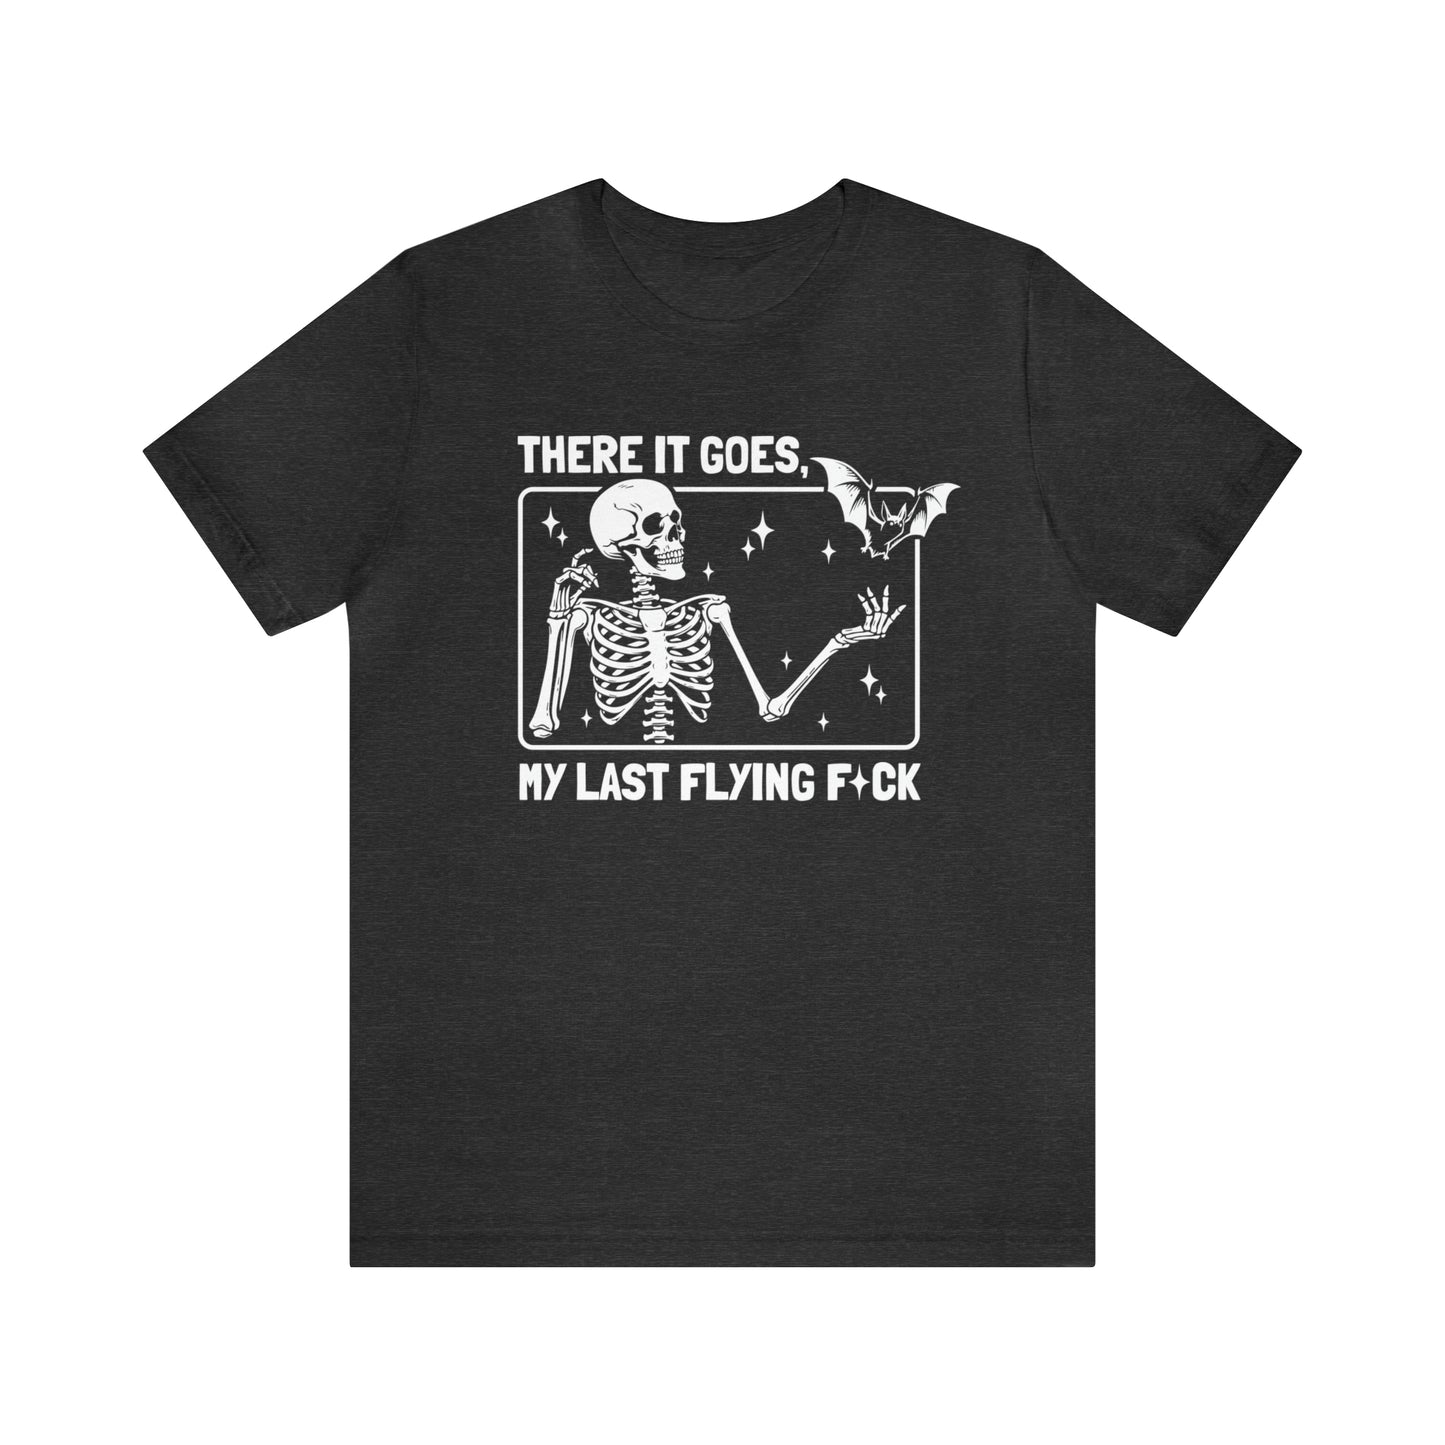 There goes my last flying - Bella Canvas Unisex Jersey Short Sleeve Tee